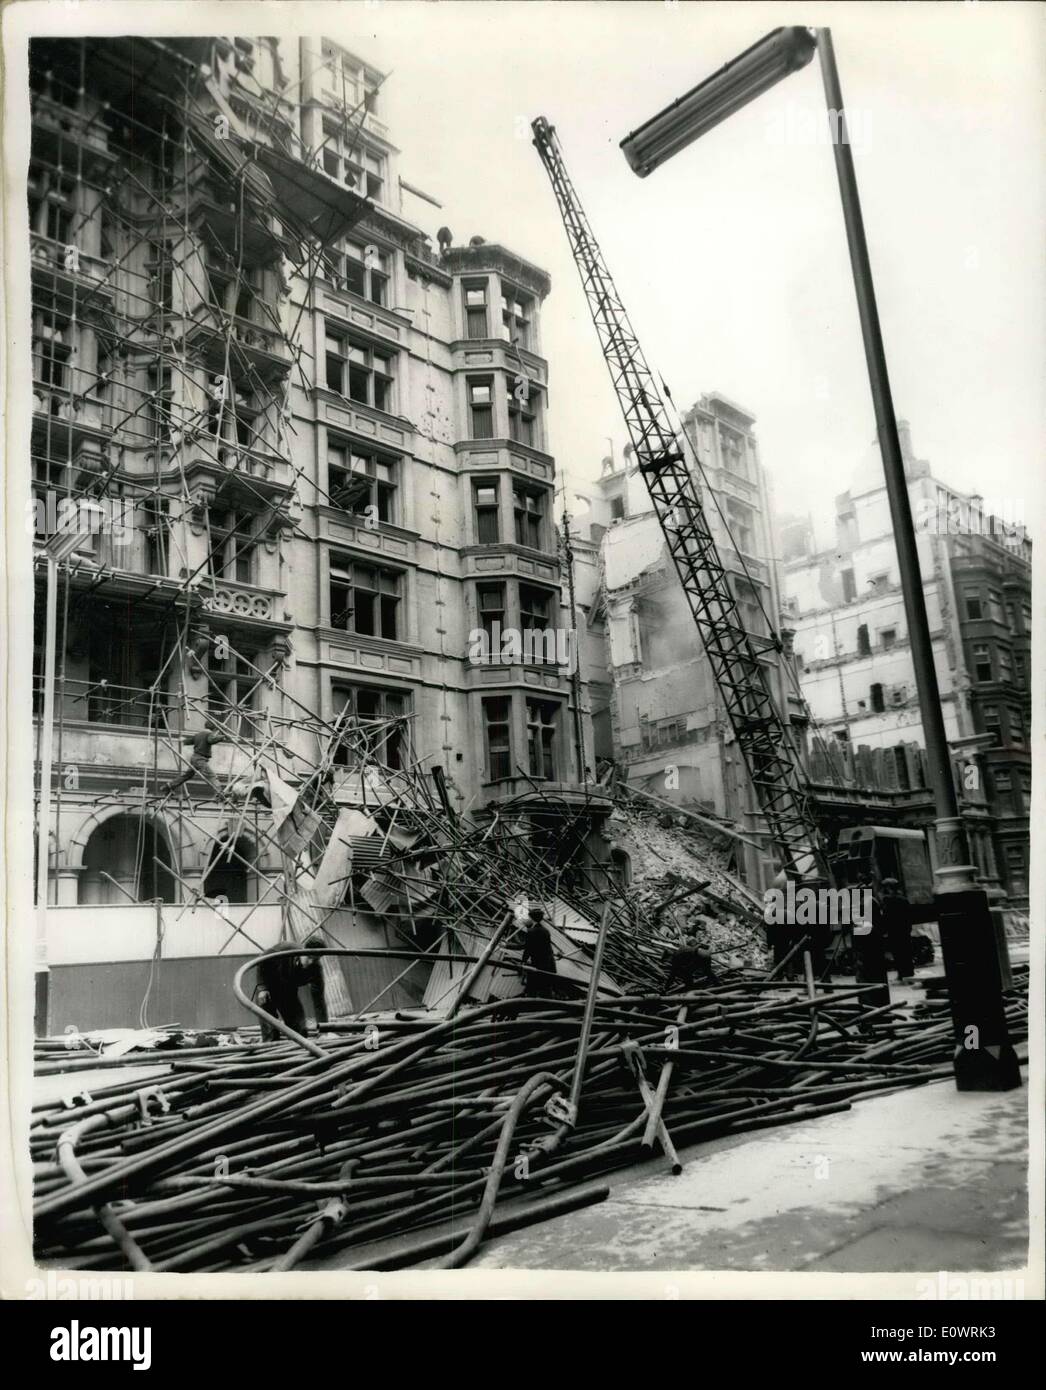 Dec. 12, 1963 - London's Victoria Street Closed to Traffic. Building Collapses During Demolition Work. Rescue workers dug frantically last night when a six story building, which was being demolished, collapsed into the roadway, in London's Victoria Street, West minster. It was thought that two people had been trapped beneath the fallen ruble. It was found later that they must have managed to avoid the rubble. the street has been closed to traffic while clearing up operations progress Stock Photo